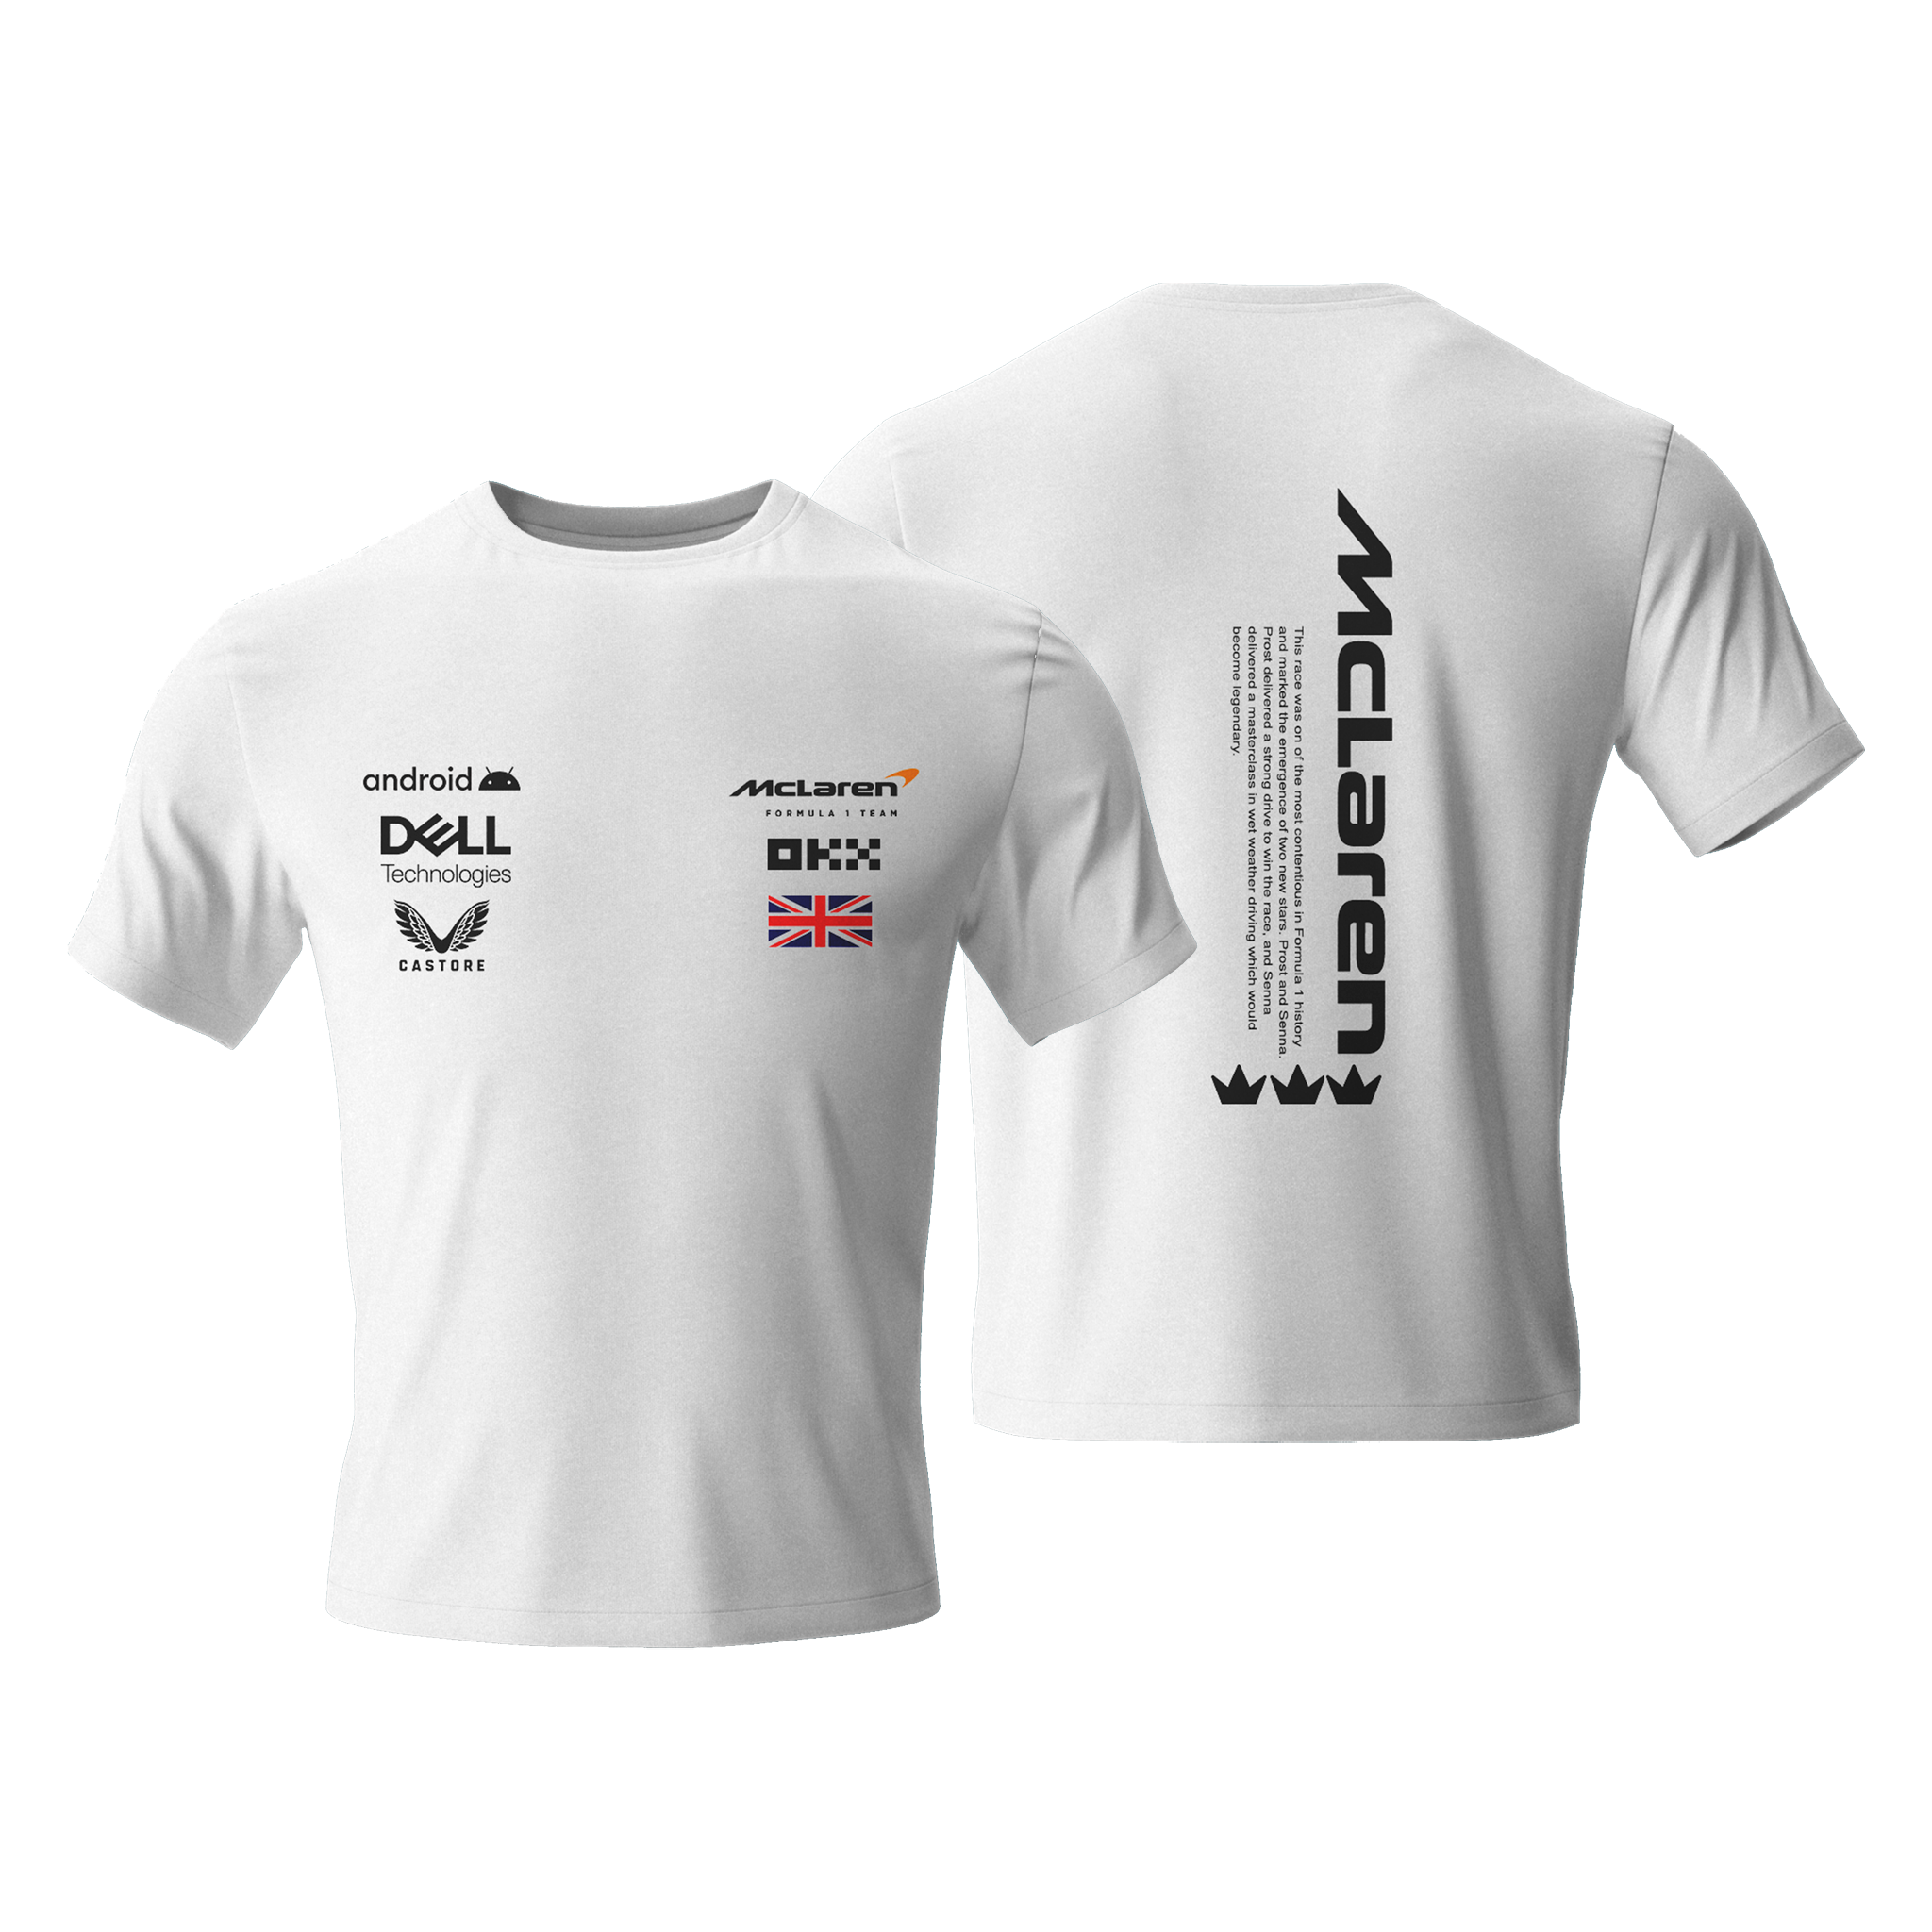 Car Enthusiast's Cotton Racing Shirt, Fuel Your Passion with the Racing Car Cotton T-Shirt